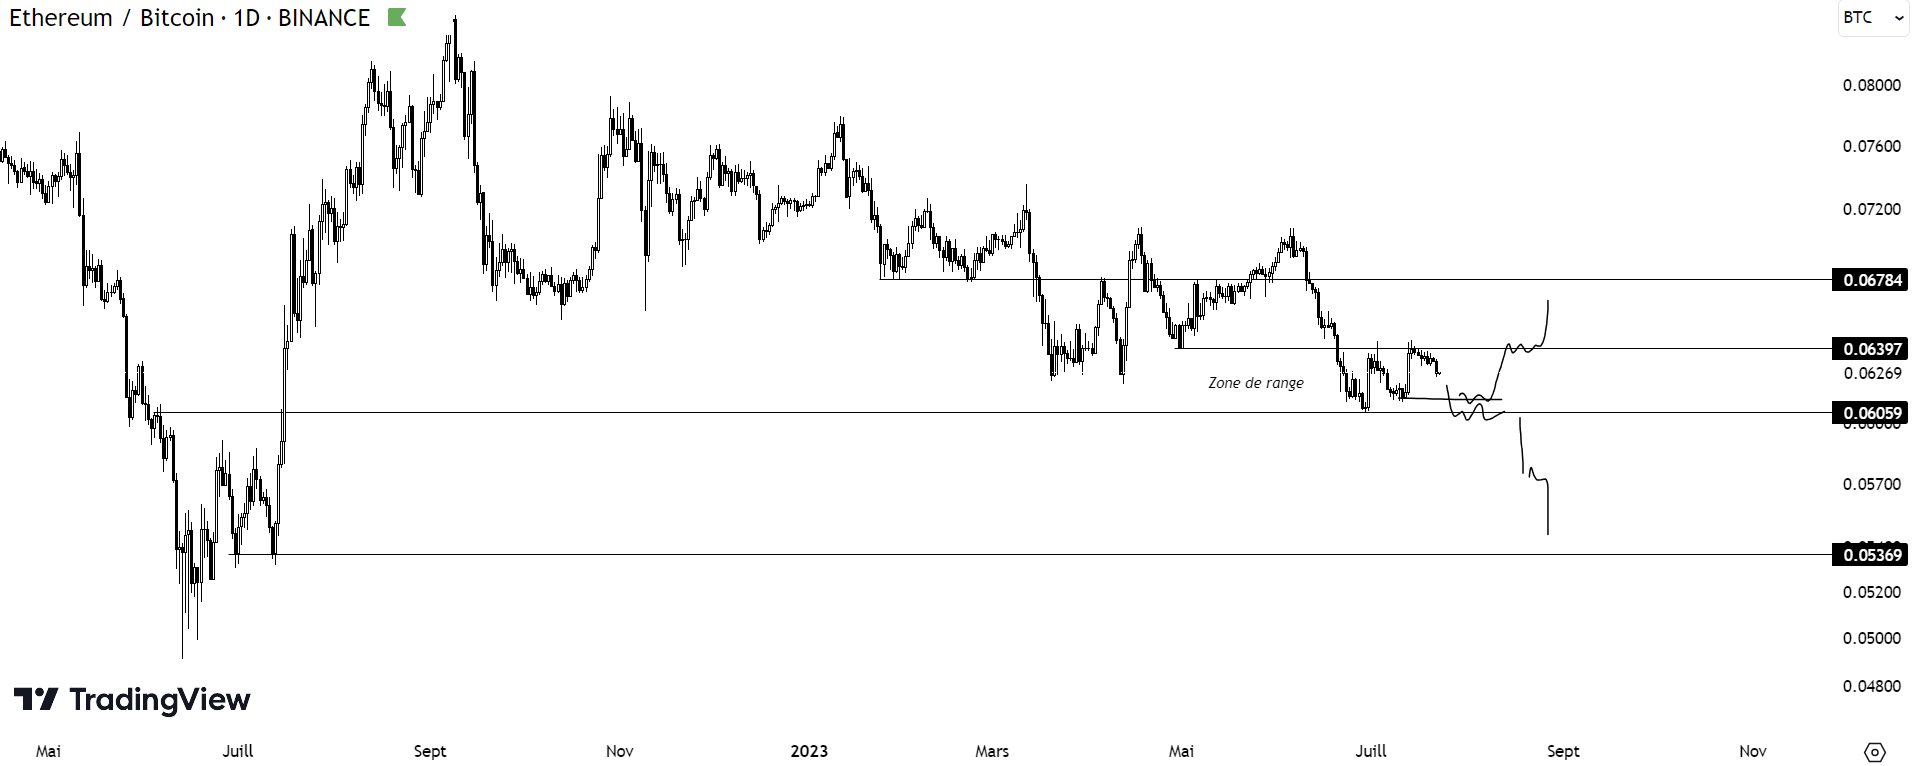 Graph representing the price of ethereum against bitcoin on a daily time unit (1D).